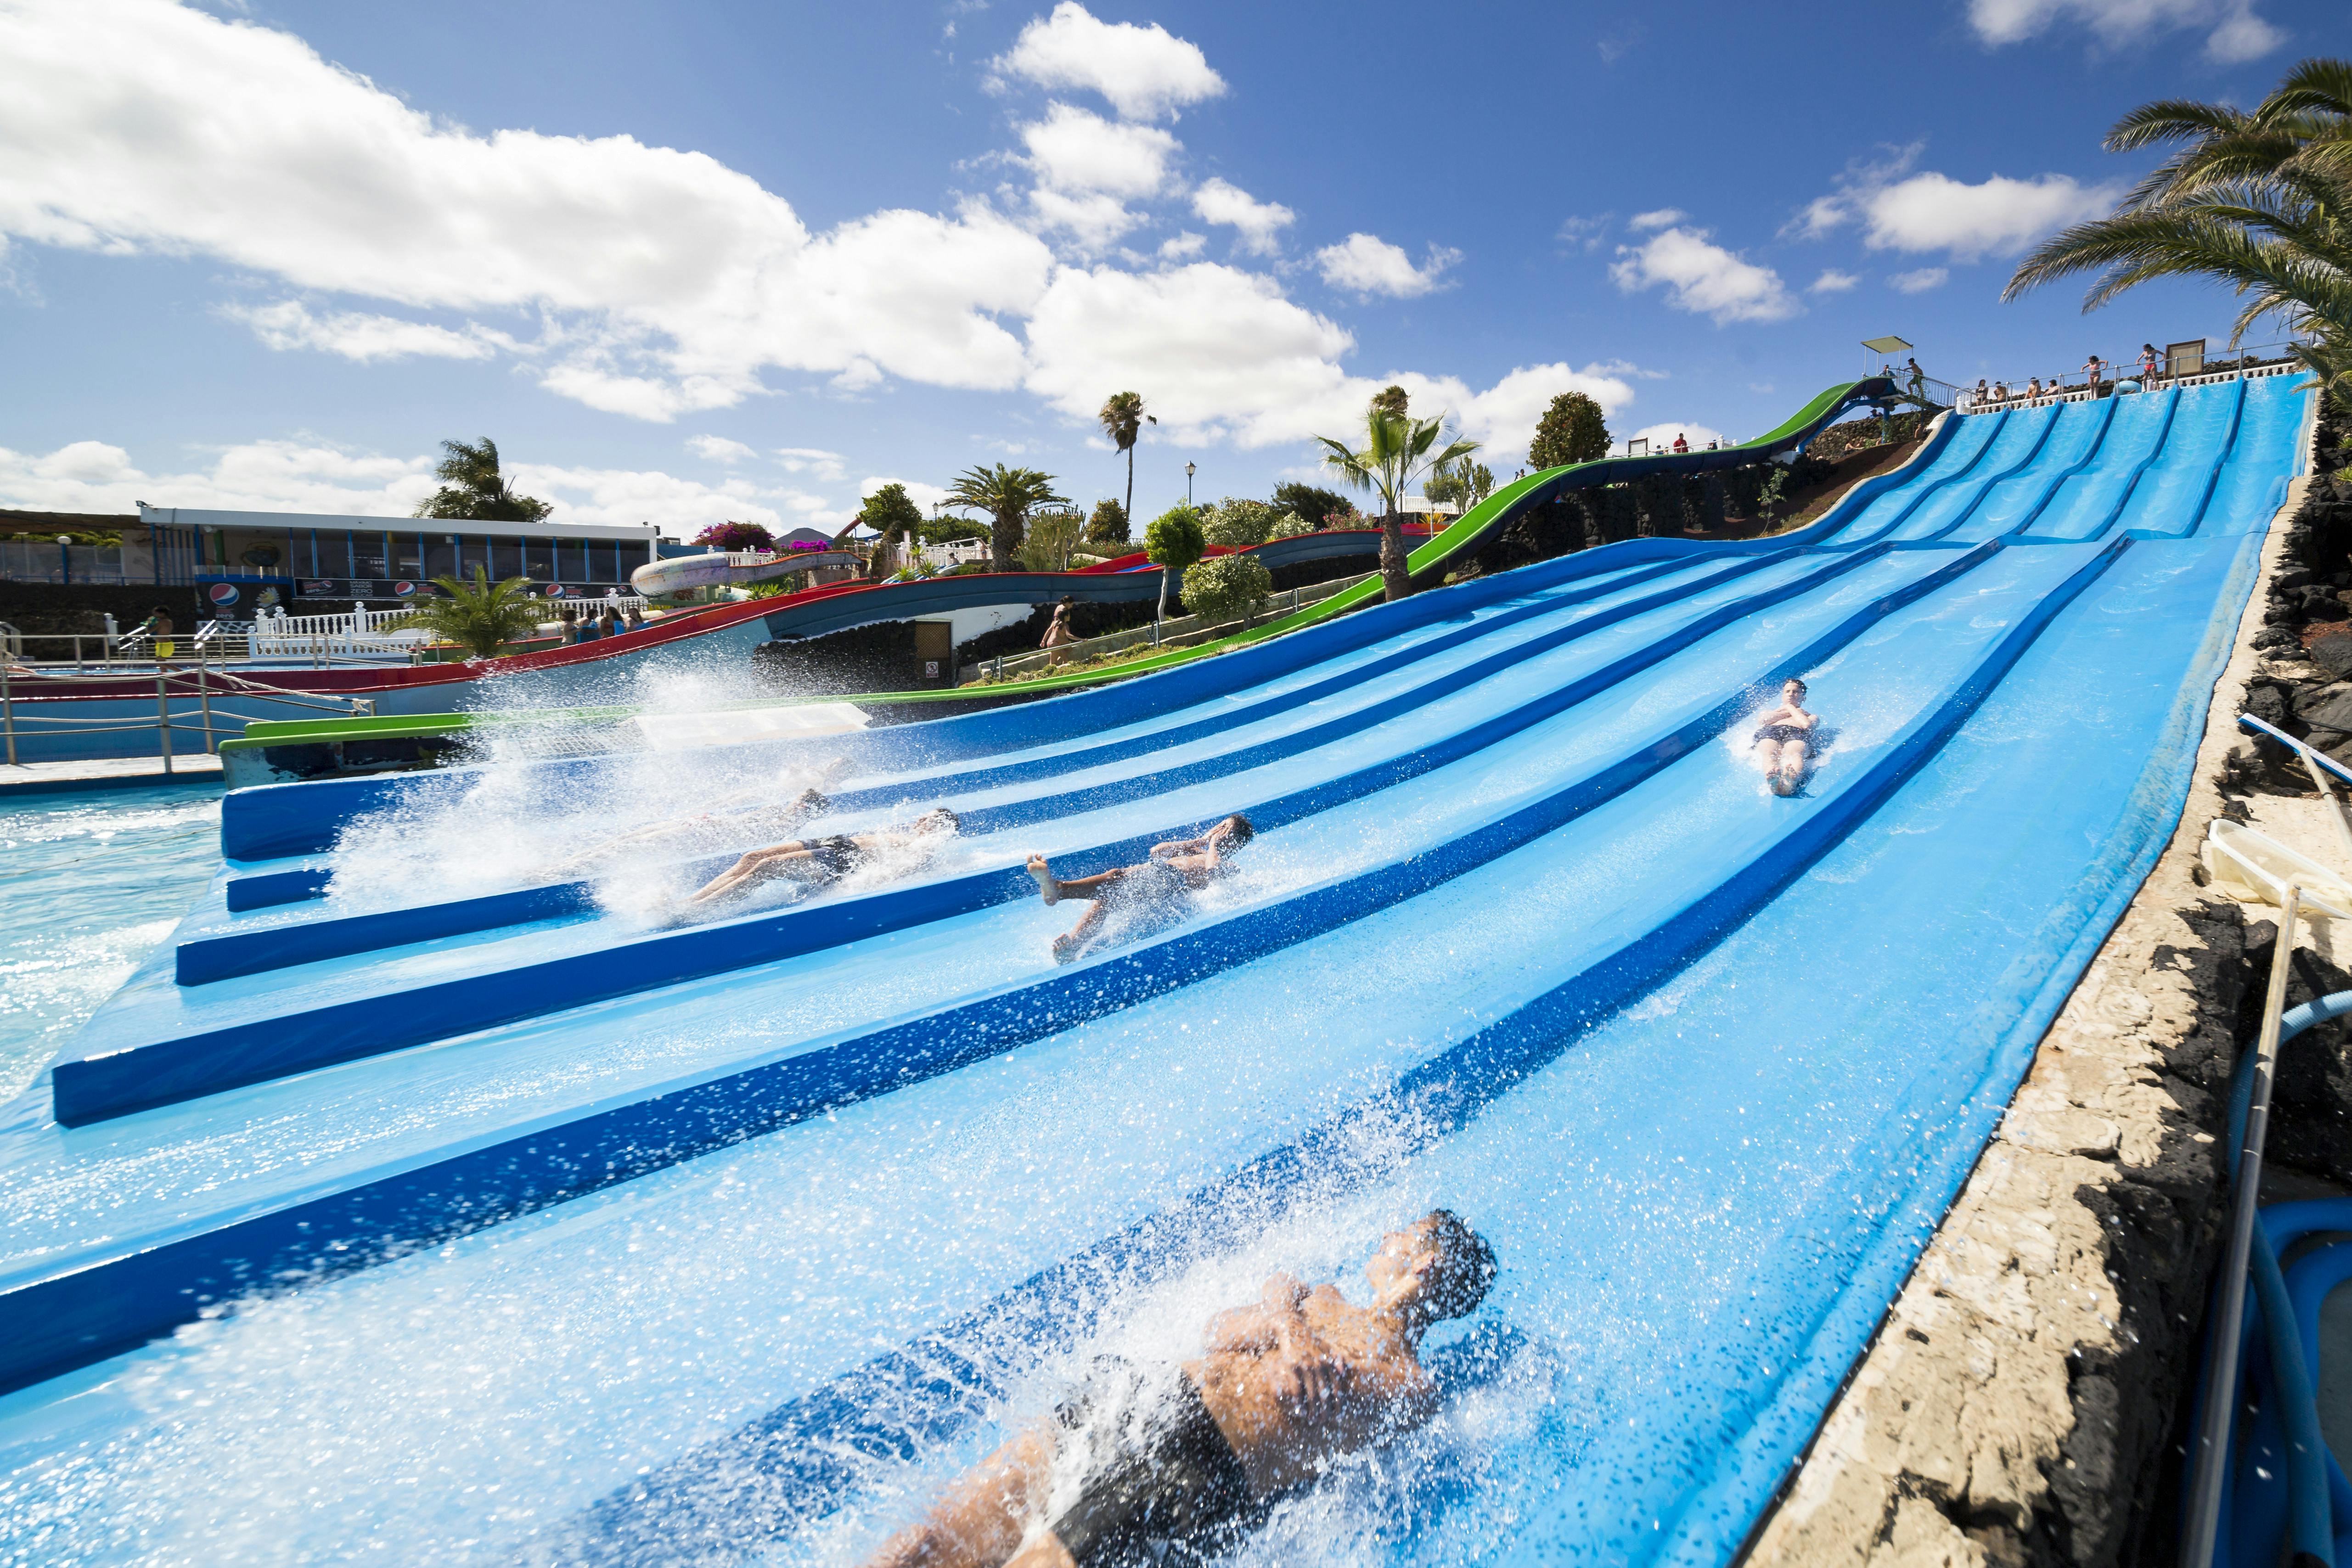 Aquapark Costa Teguise – ticket only